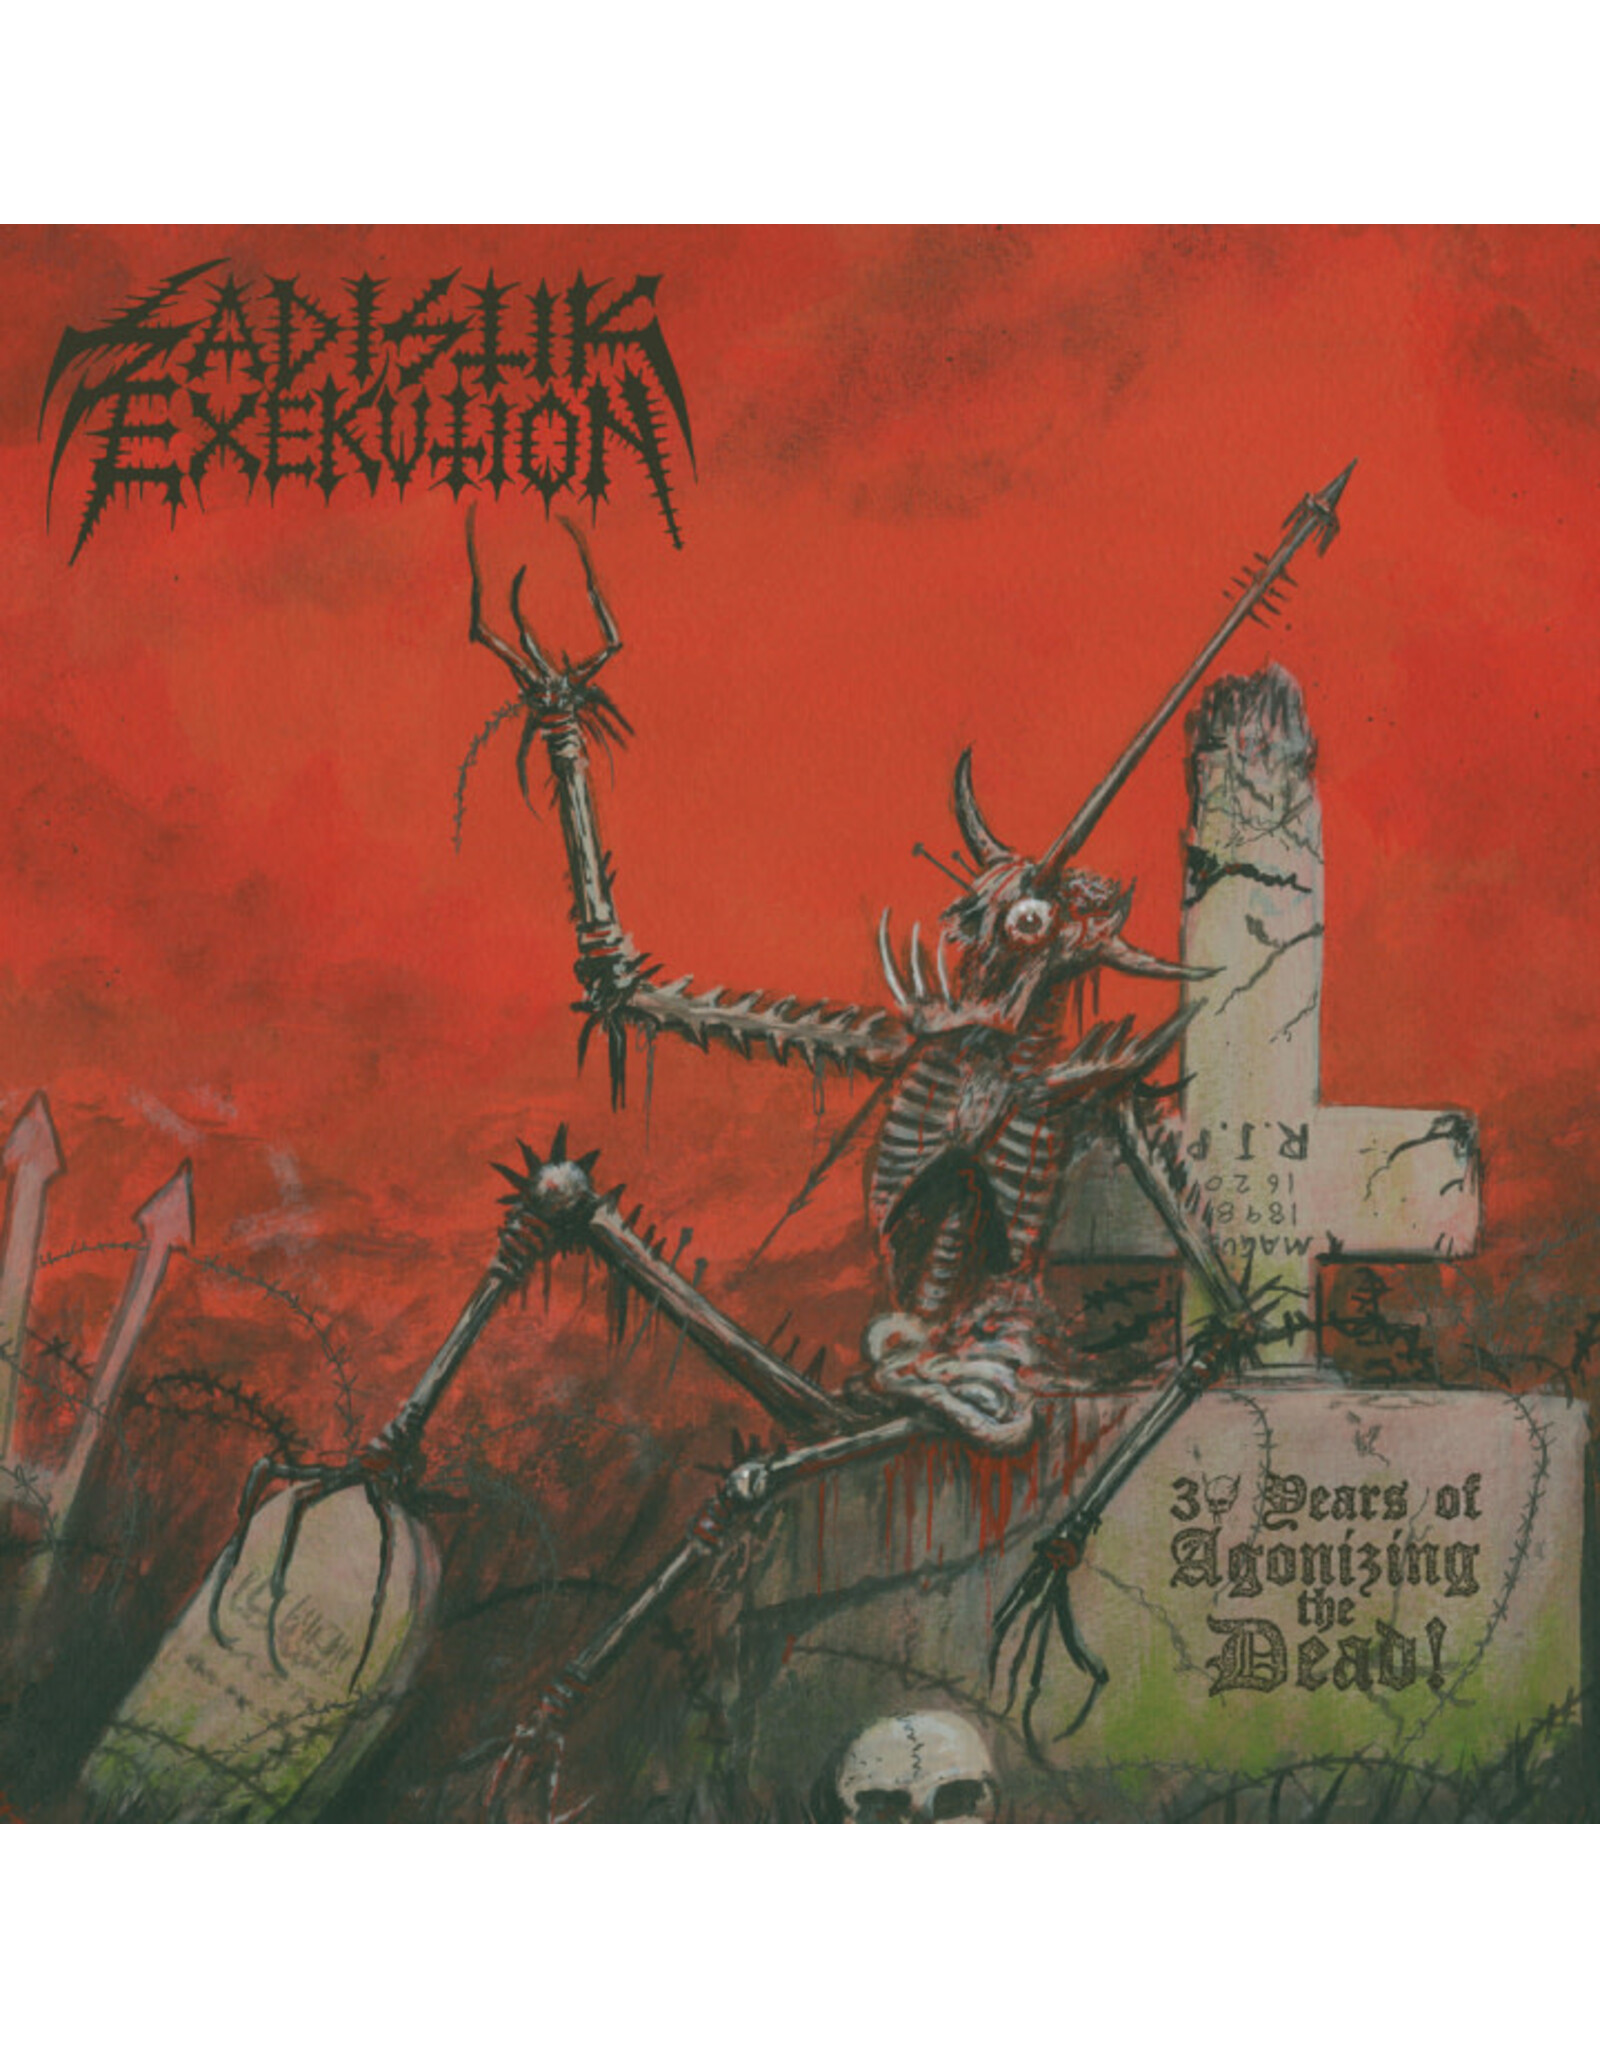 Nuclear War Now Sadistik Exekution: 30 Years Of Agonizing The Dead LP